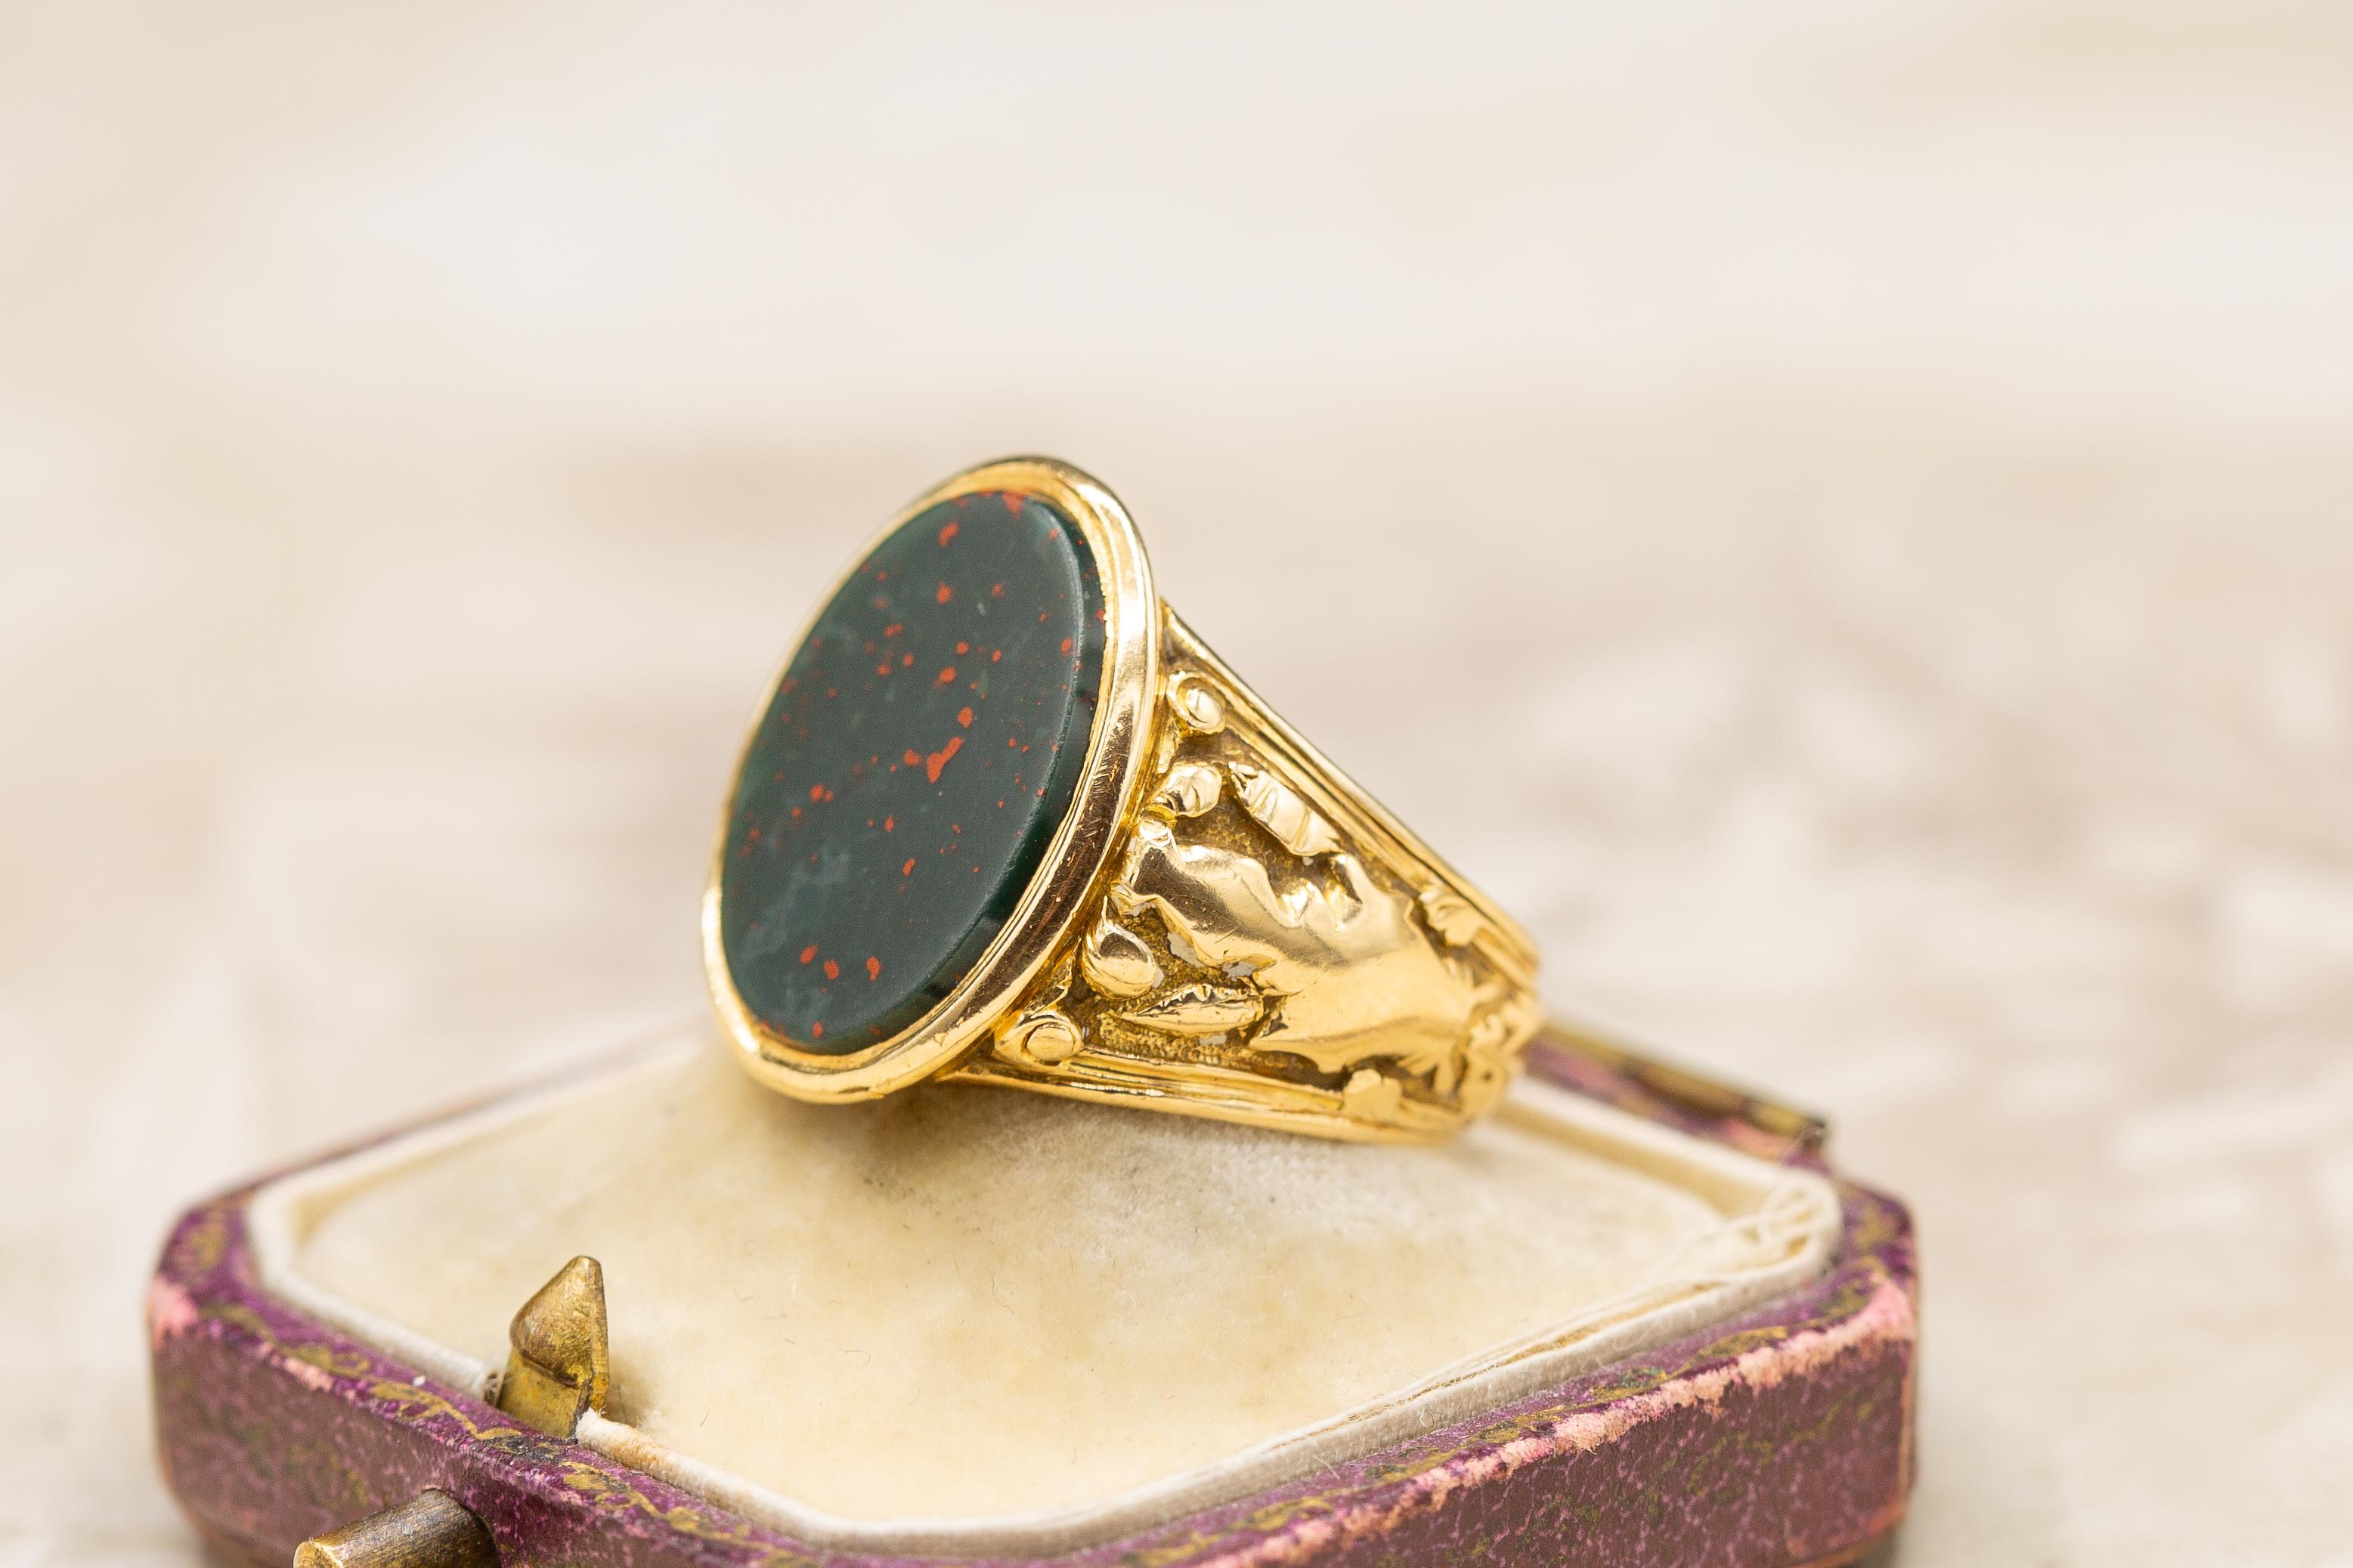 Antique Victorian Heavy 18K Gold Bloodstone Signet Ring Mens Coat of Arms c.1890 6